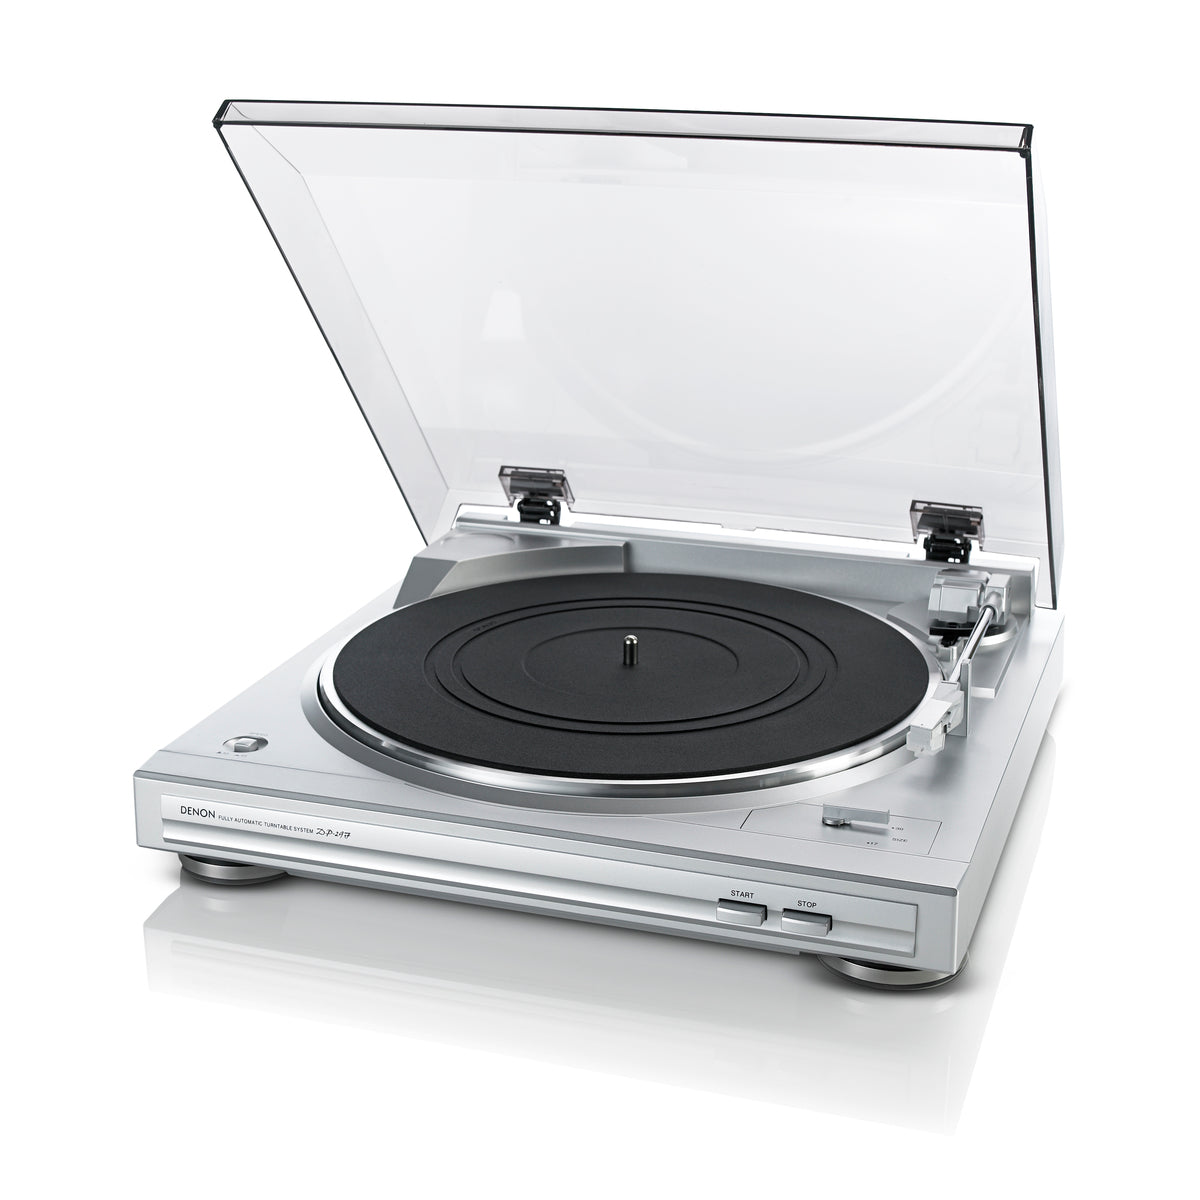 Denon DP-29F - Fully Automatic Turntable